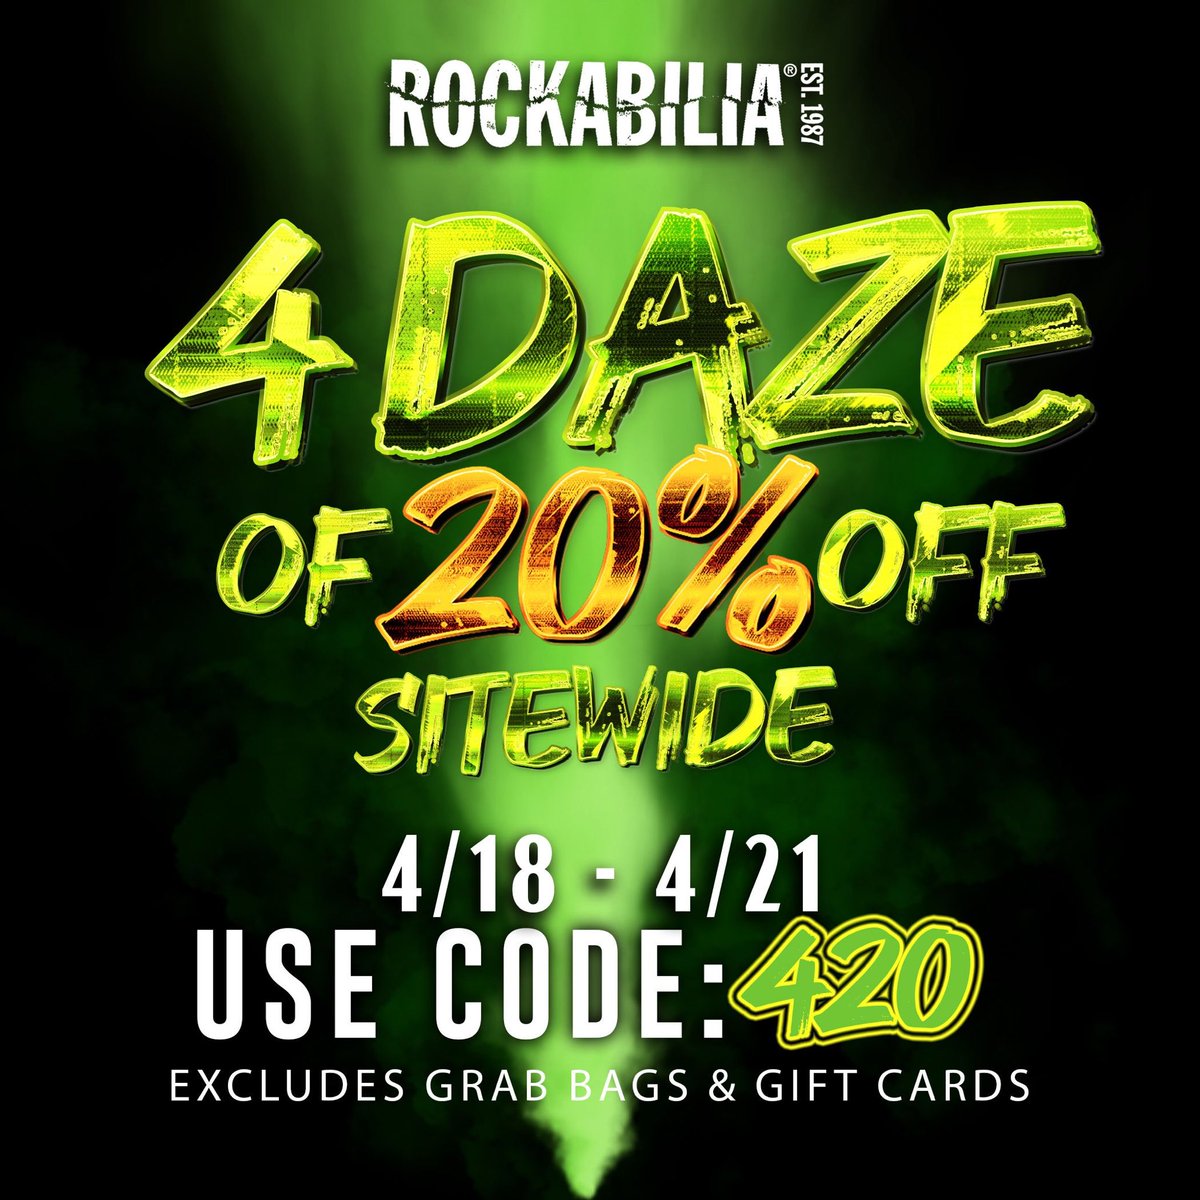 Enjoy 4 Daze of 20% off sitewide and celebrate 420 in style with your friends at Rockabilia! Just enter promo code 420 @ checkout on Rockabilia.com starting NOW through Sunday, April 21st @ 11:59p.m. CST. Offer valid sitewide, but excludes gift cards & grab bags.…